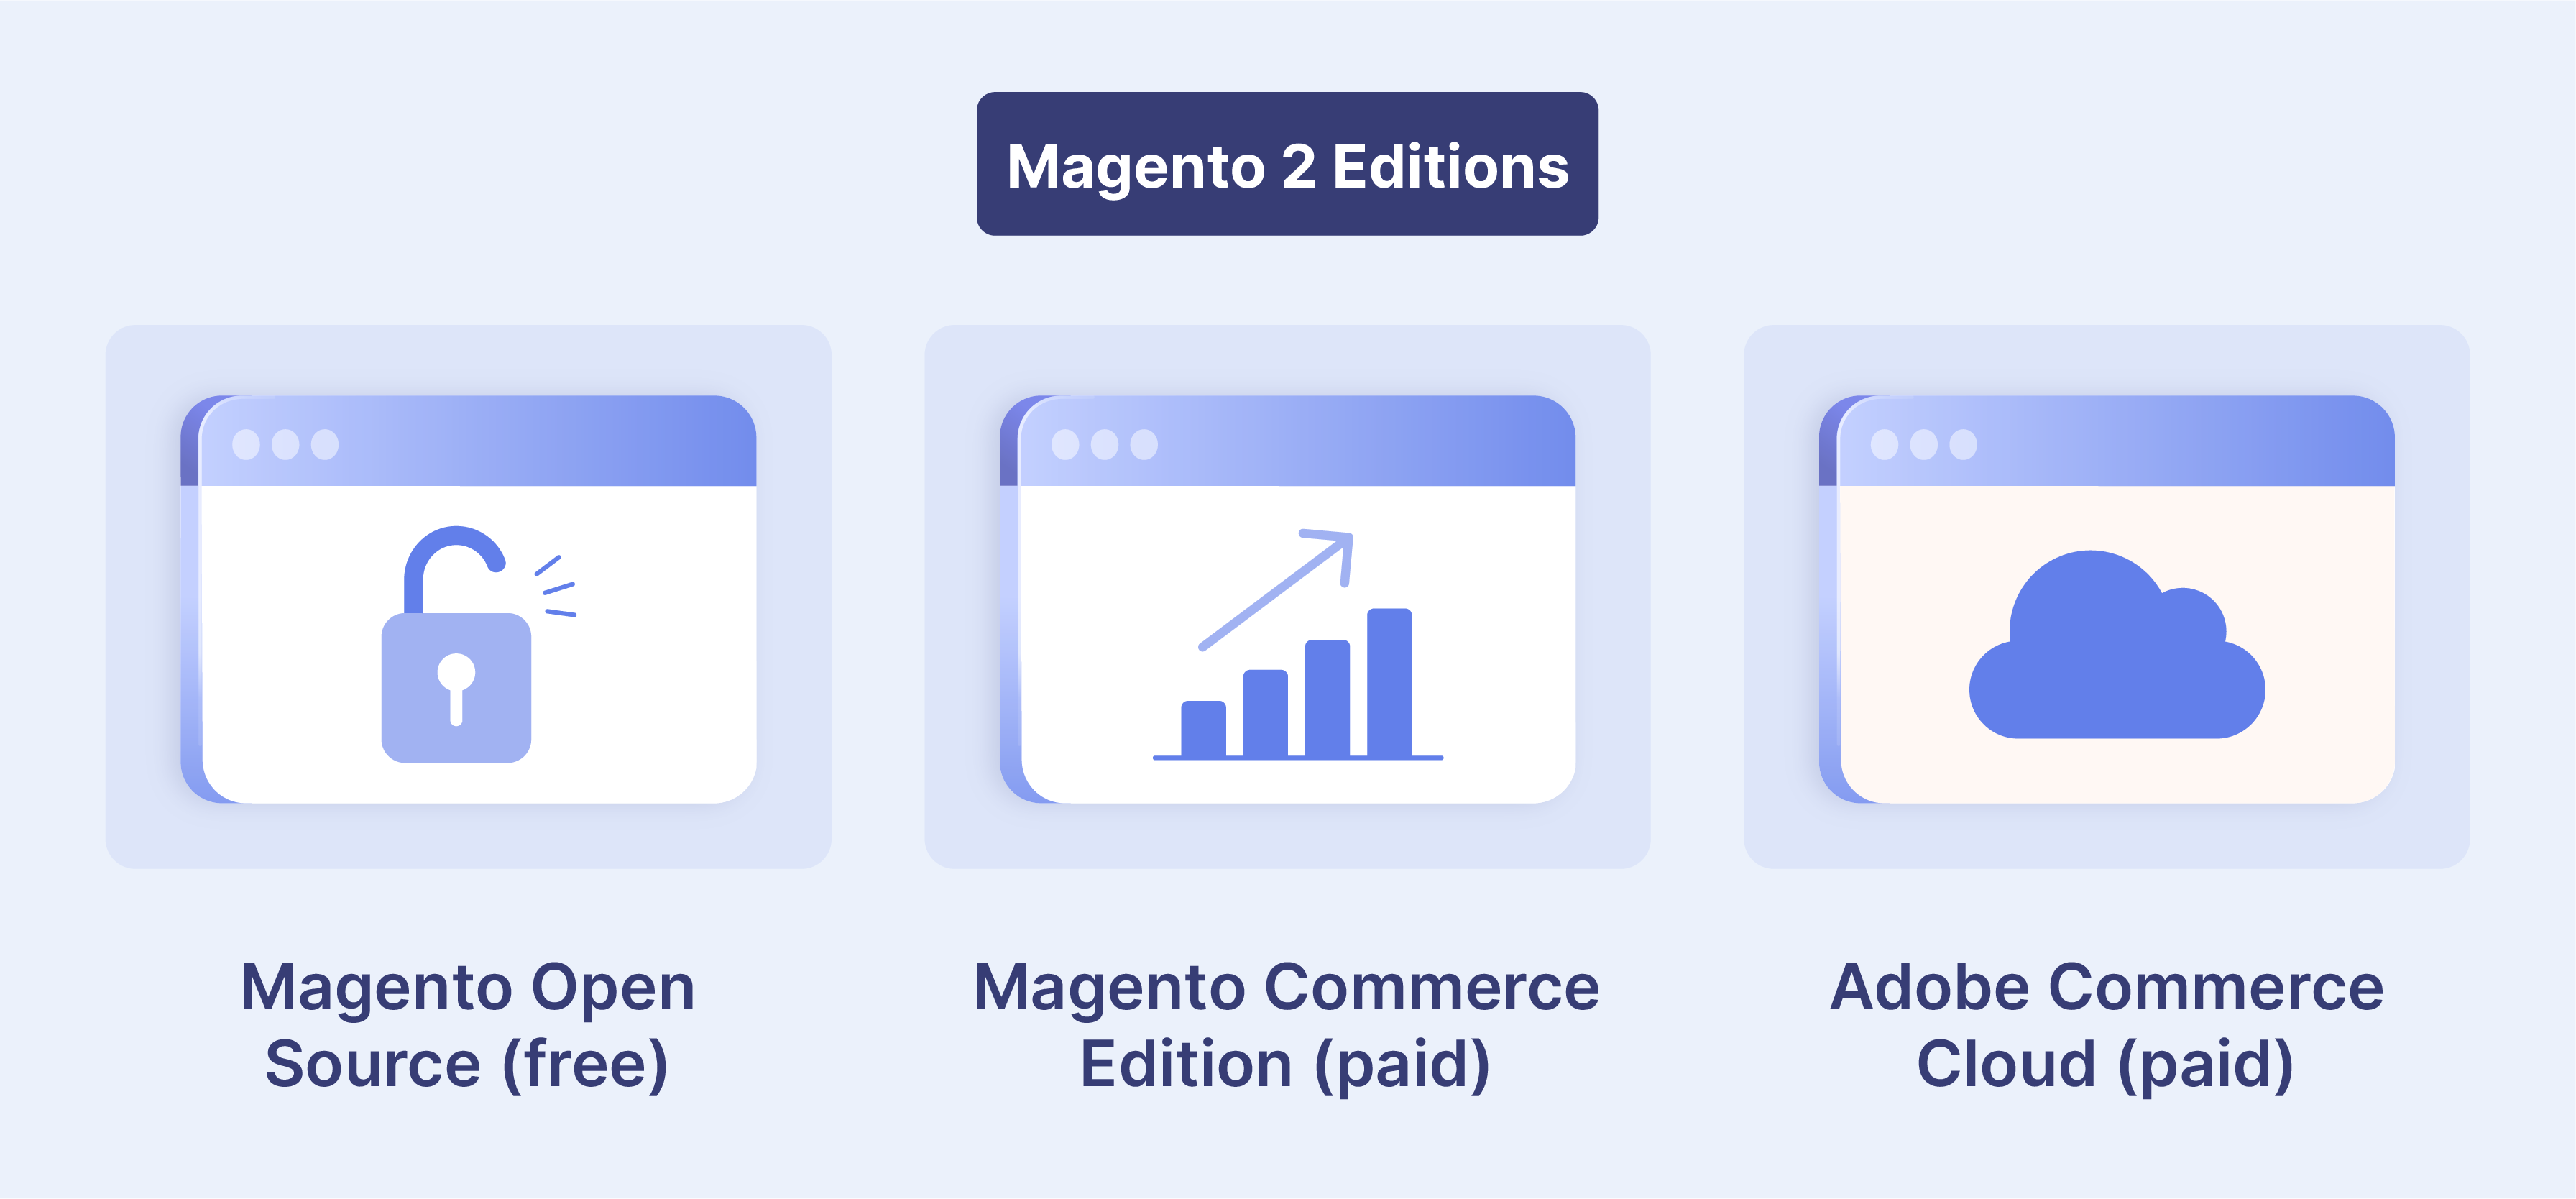 Overview of Magento 2 Editions showing Open Source, Commerce, and Commerce Cloud